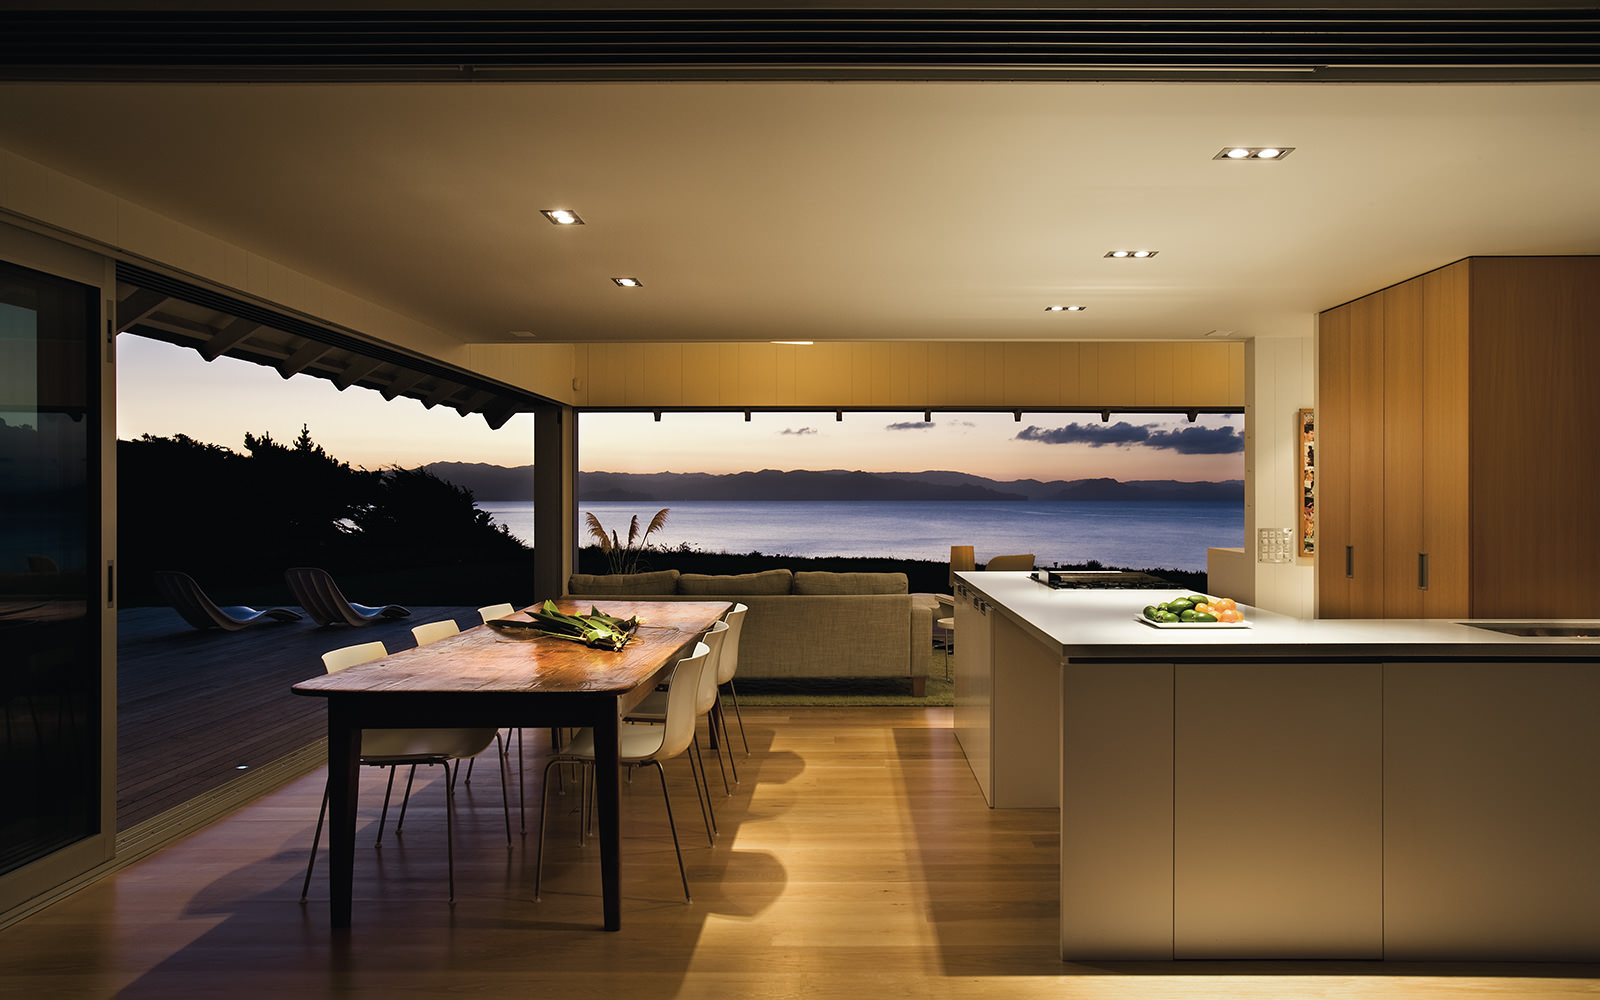 sunset in architectural house by the water